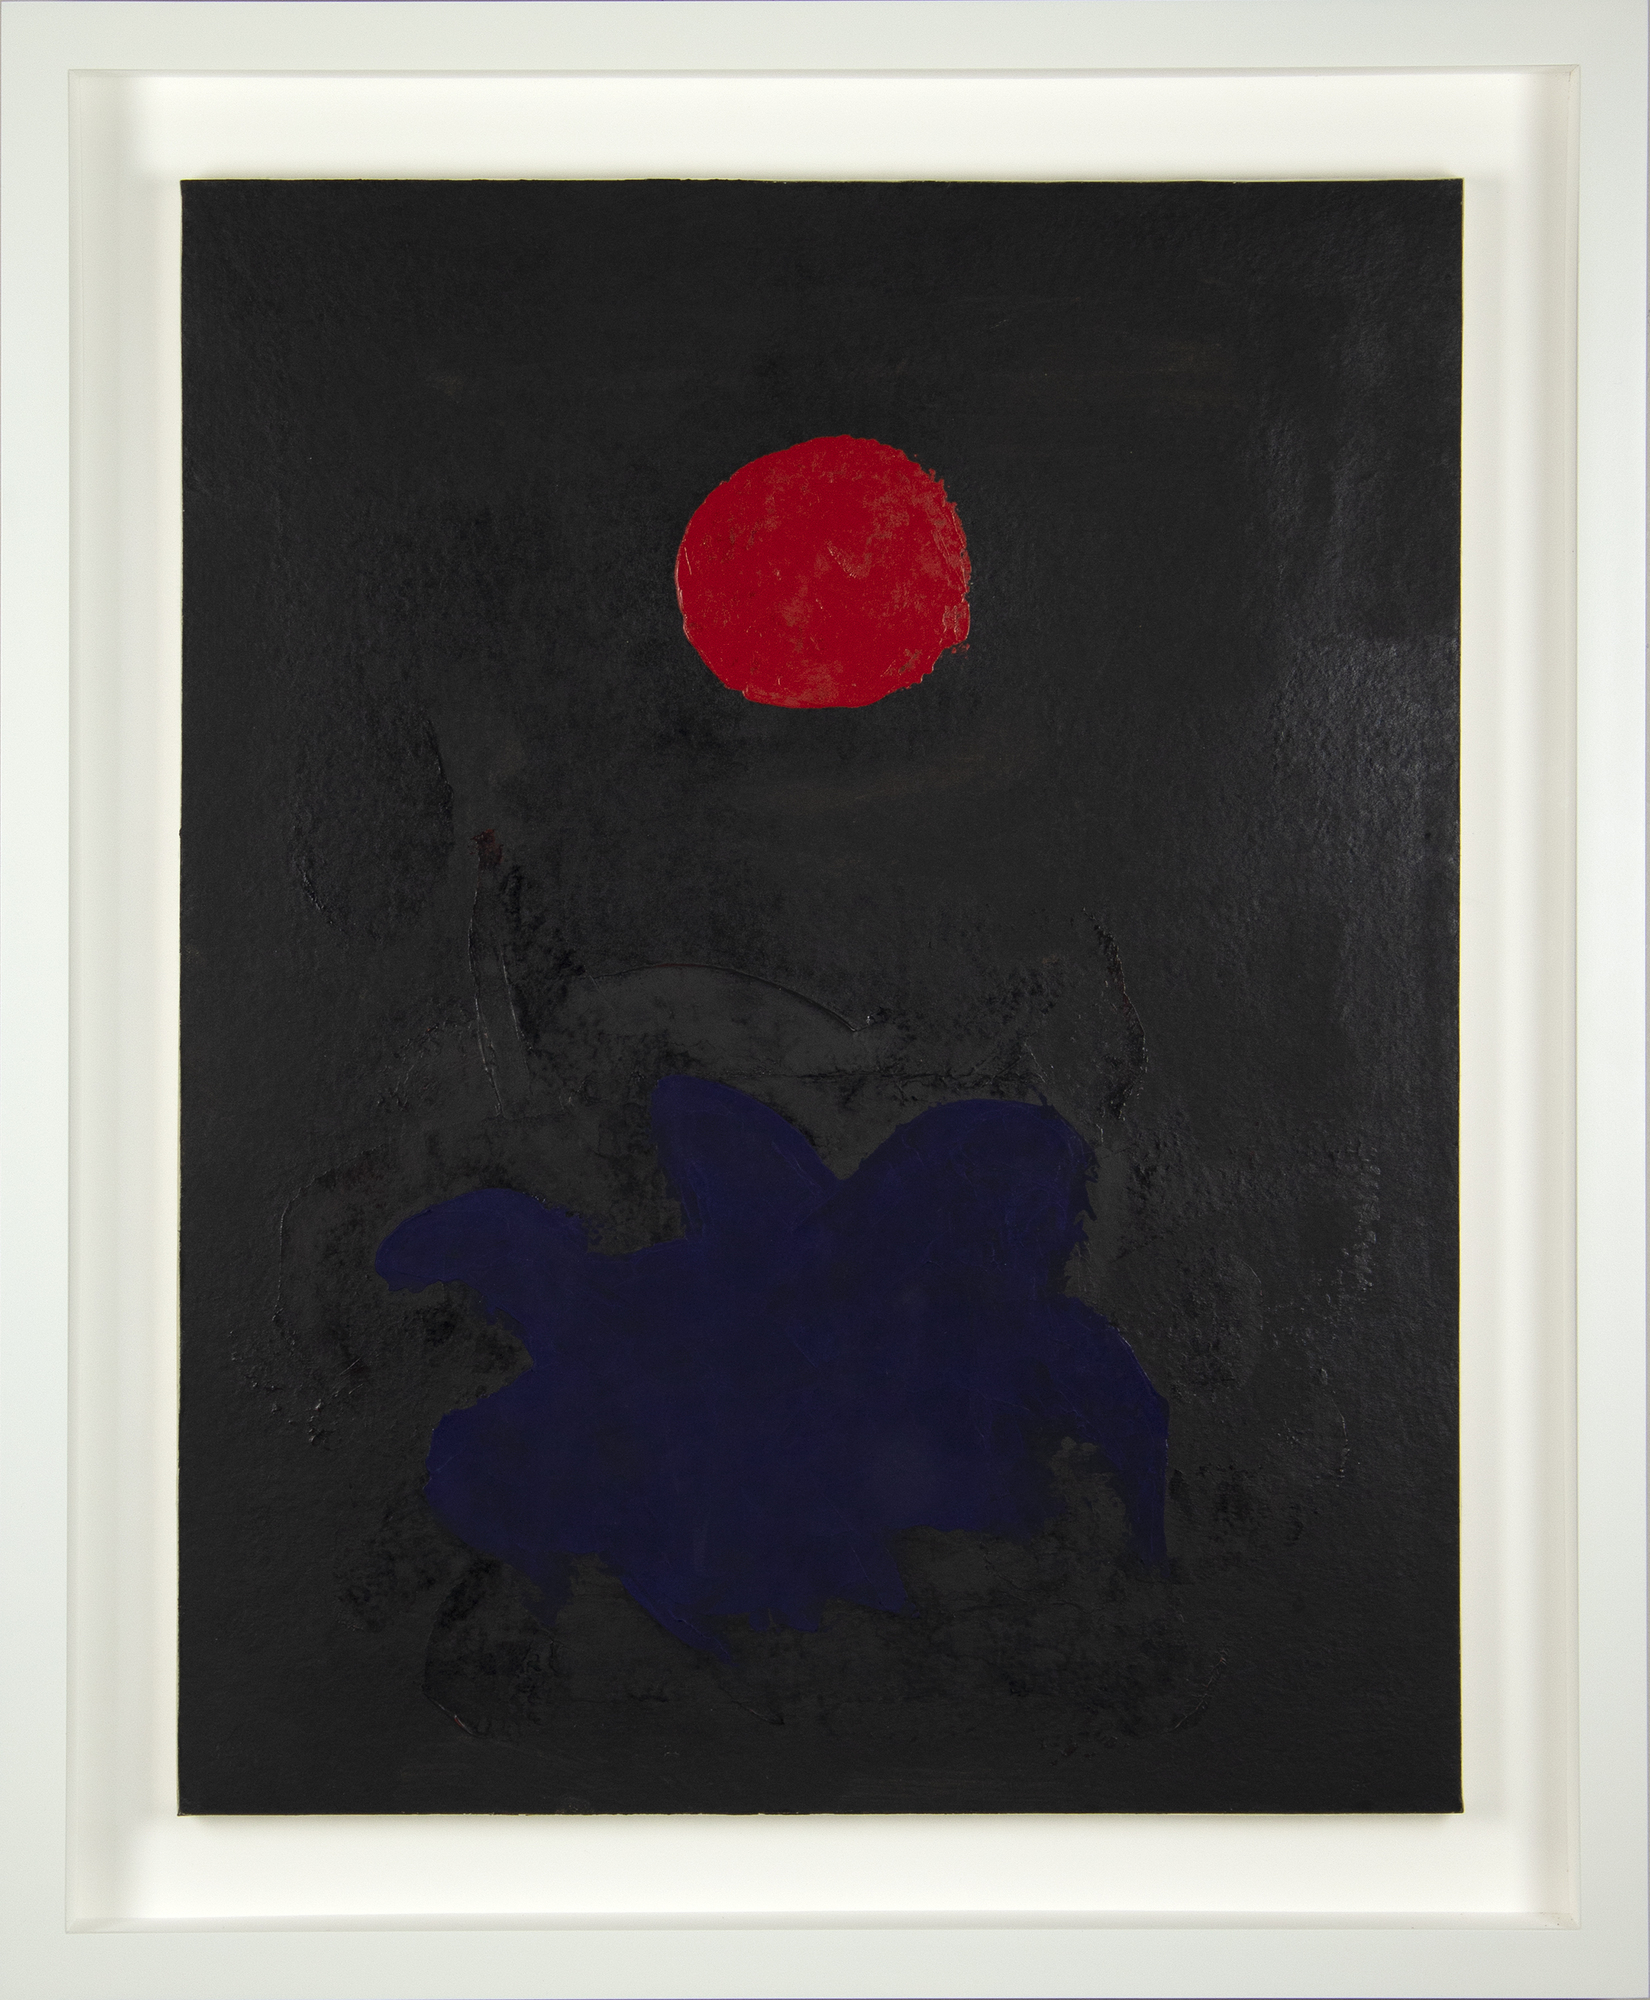 Gottlieb was a first-generation member of the Abstract Expressionists. “Blue on Black” is from his trademark “Burst” series. Like fellow Ab Ex artists including Pollock who settled into their signature style late in their careers, it was not until 1956 that Gottlieb focused on these burst paintings.<br><br>This painting showcases the lyricism that he found within the “Burst” paintings by simplifying color and form. In this painting, the shapes and color coalesce to produce harmony and depth within the visual landscape of the canvas.<br><br>Gottlieb had an amazing 56 solo exhibitions during his long career and his works are included in over 140 museums throughout the world.